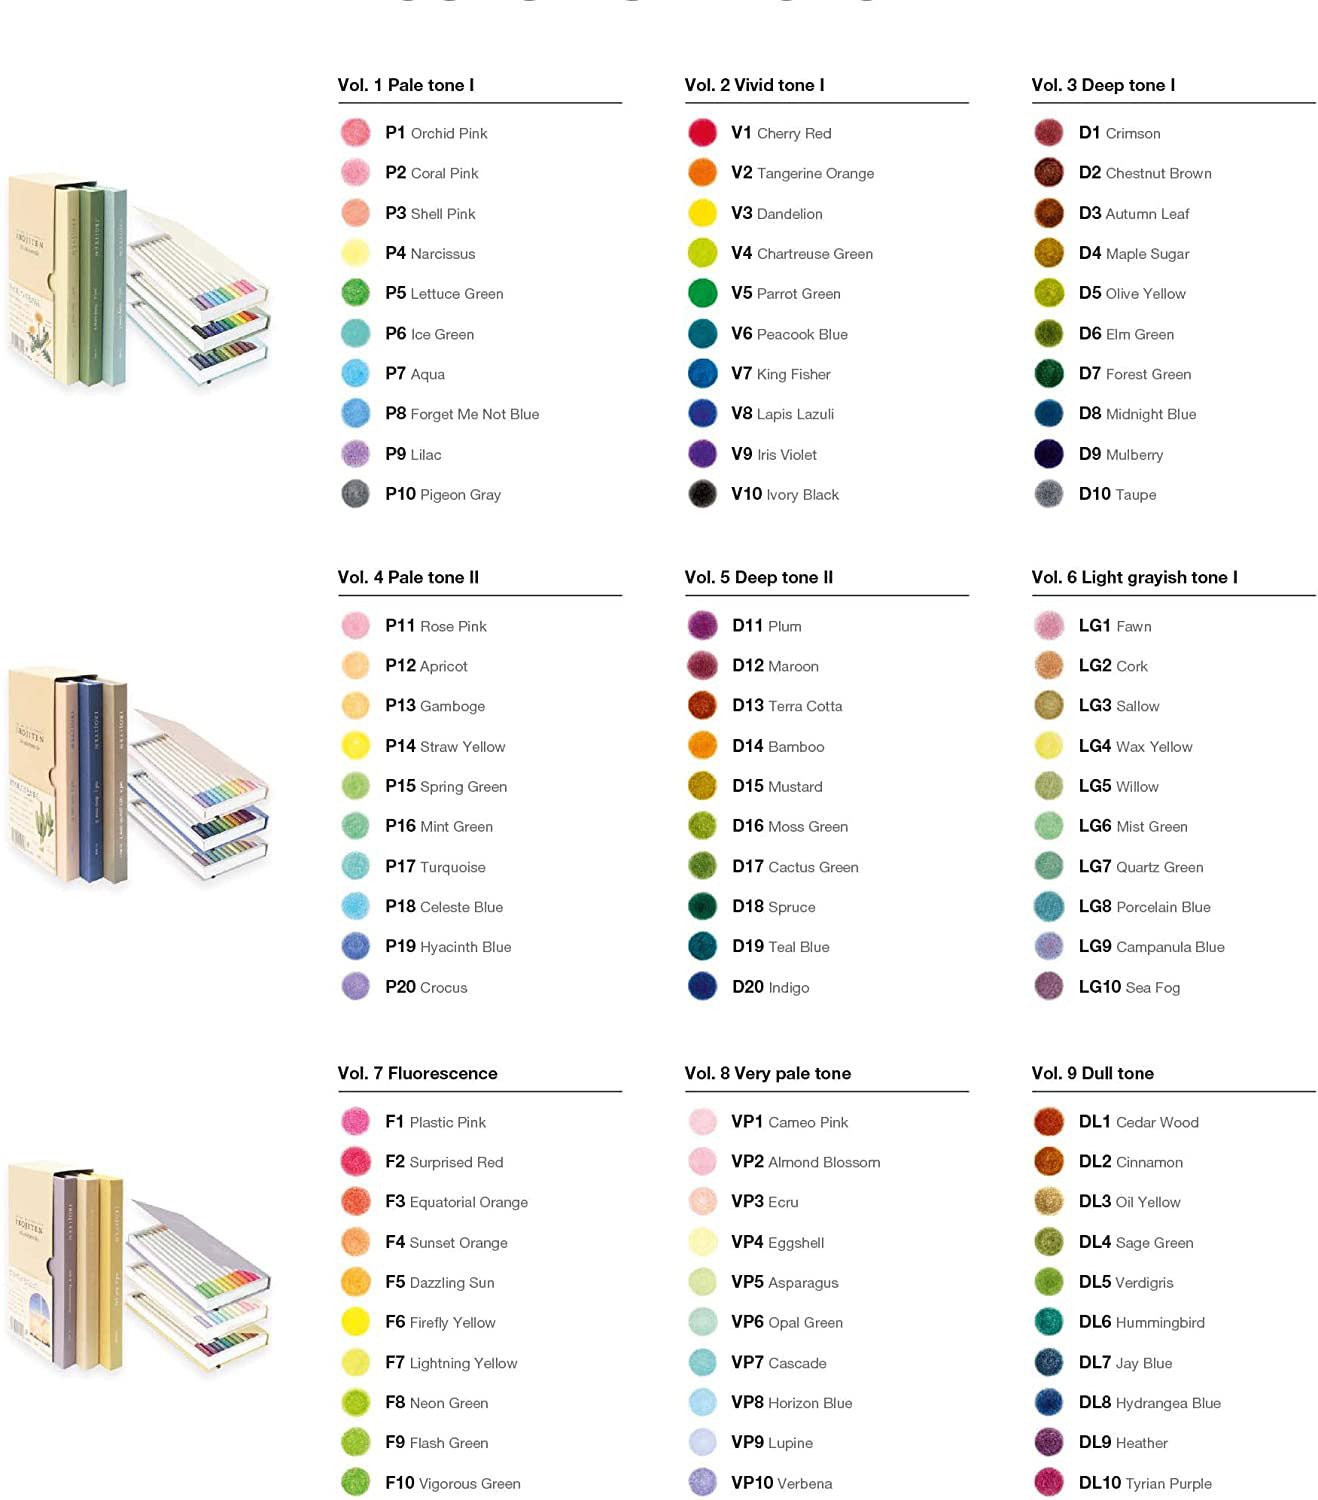 30 Irojiten Colored Pencil Collection Vol. 7, 8, 9 / Tombow